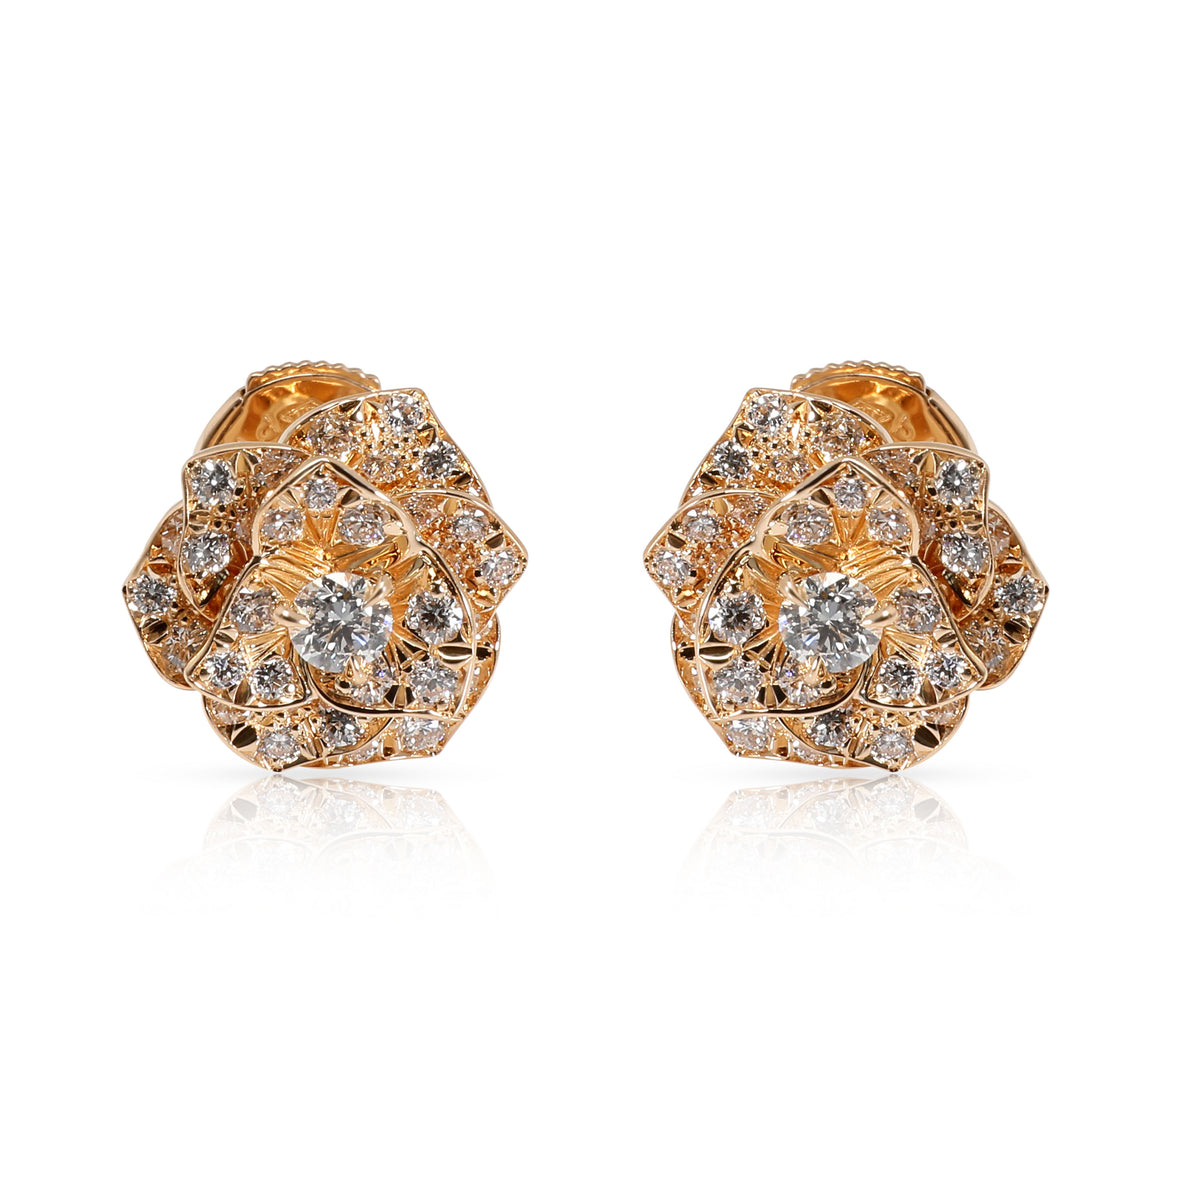 Piaget Rose Stud Diamond Earring in 18K Yellow Gold 0.92 CTW by WP ...